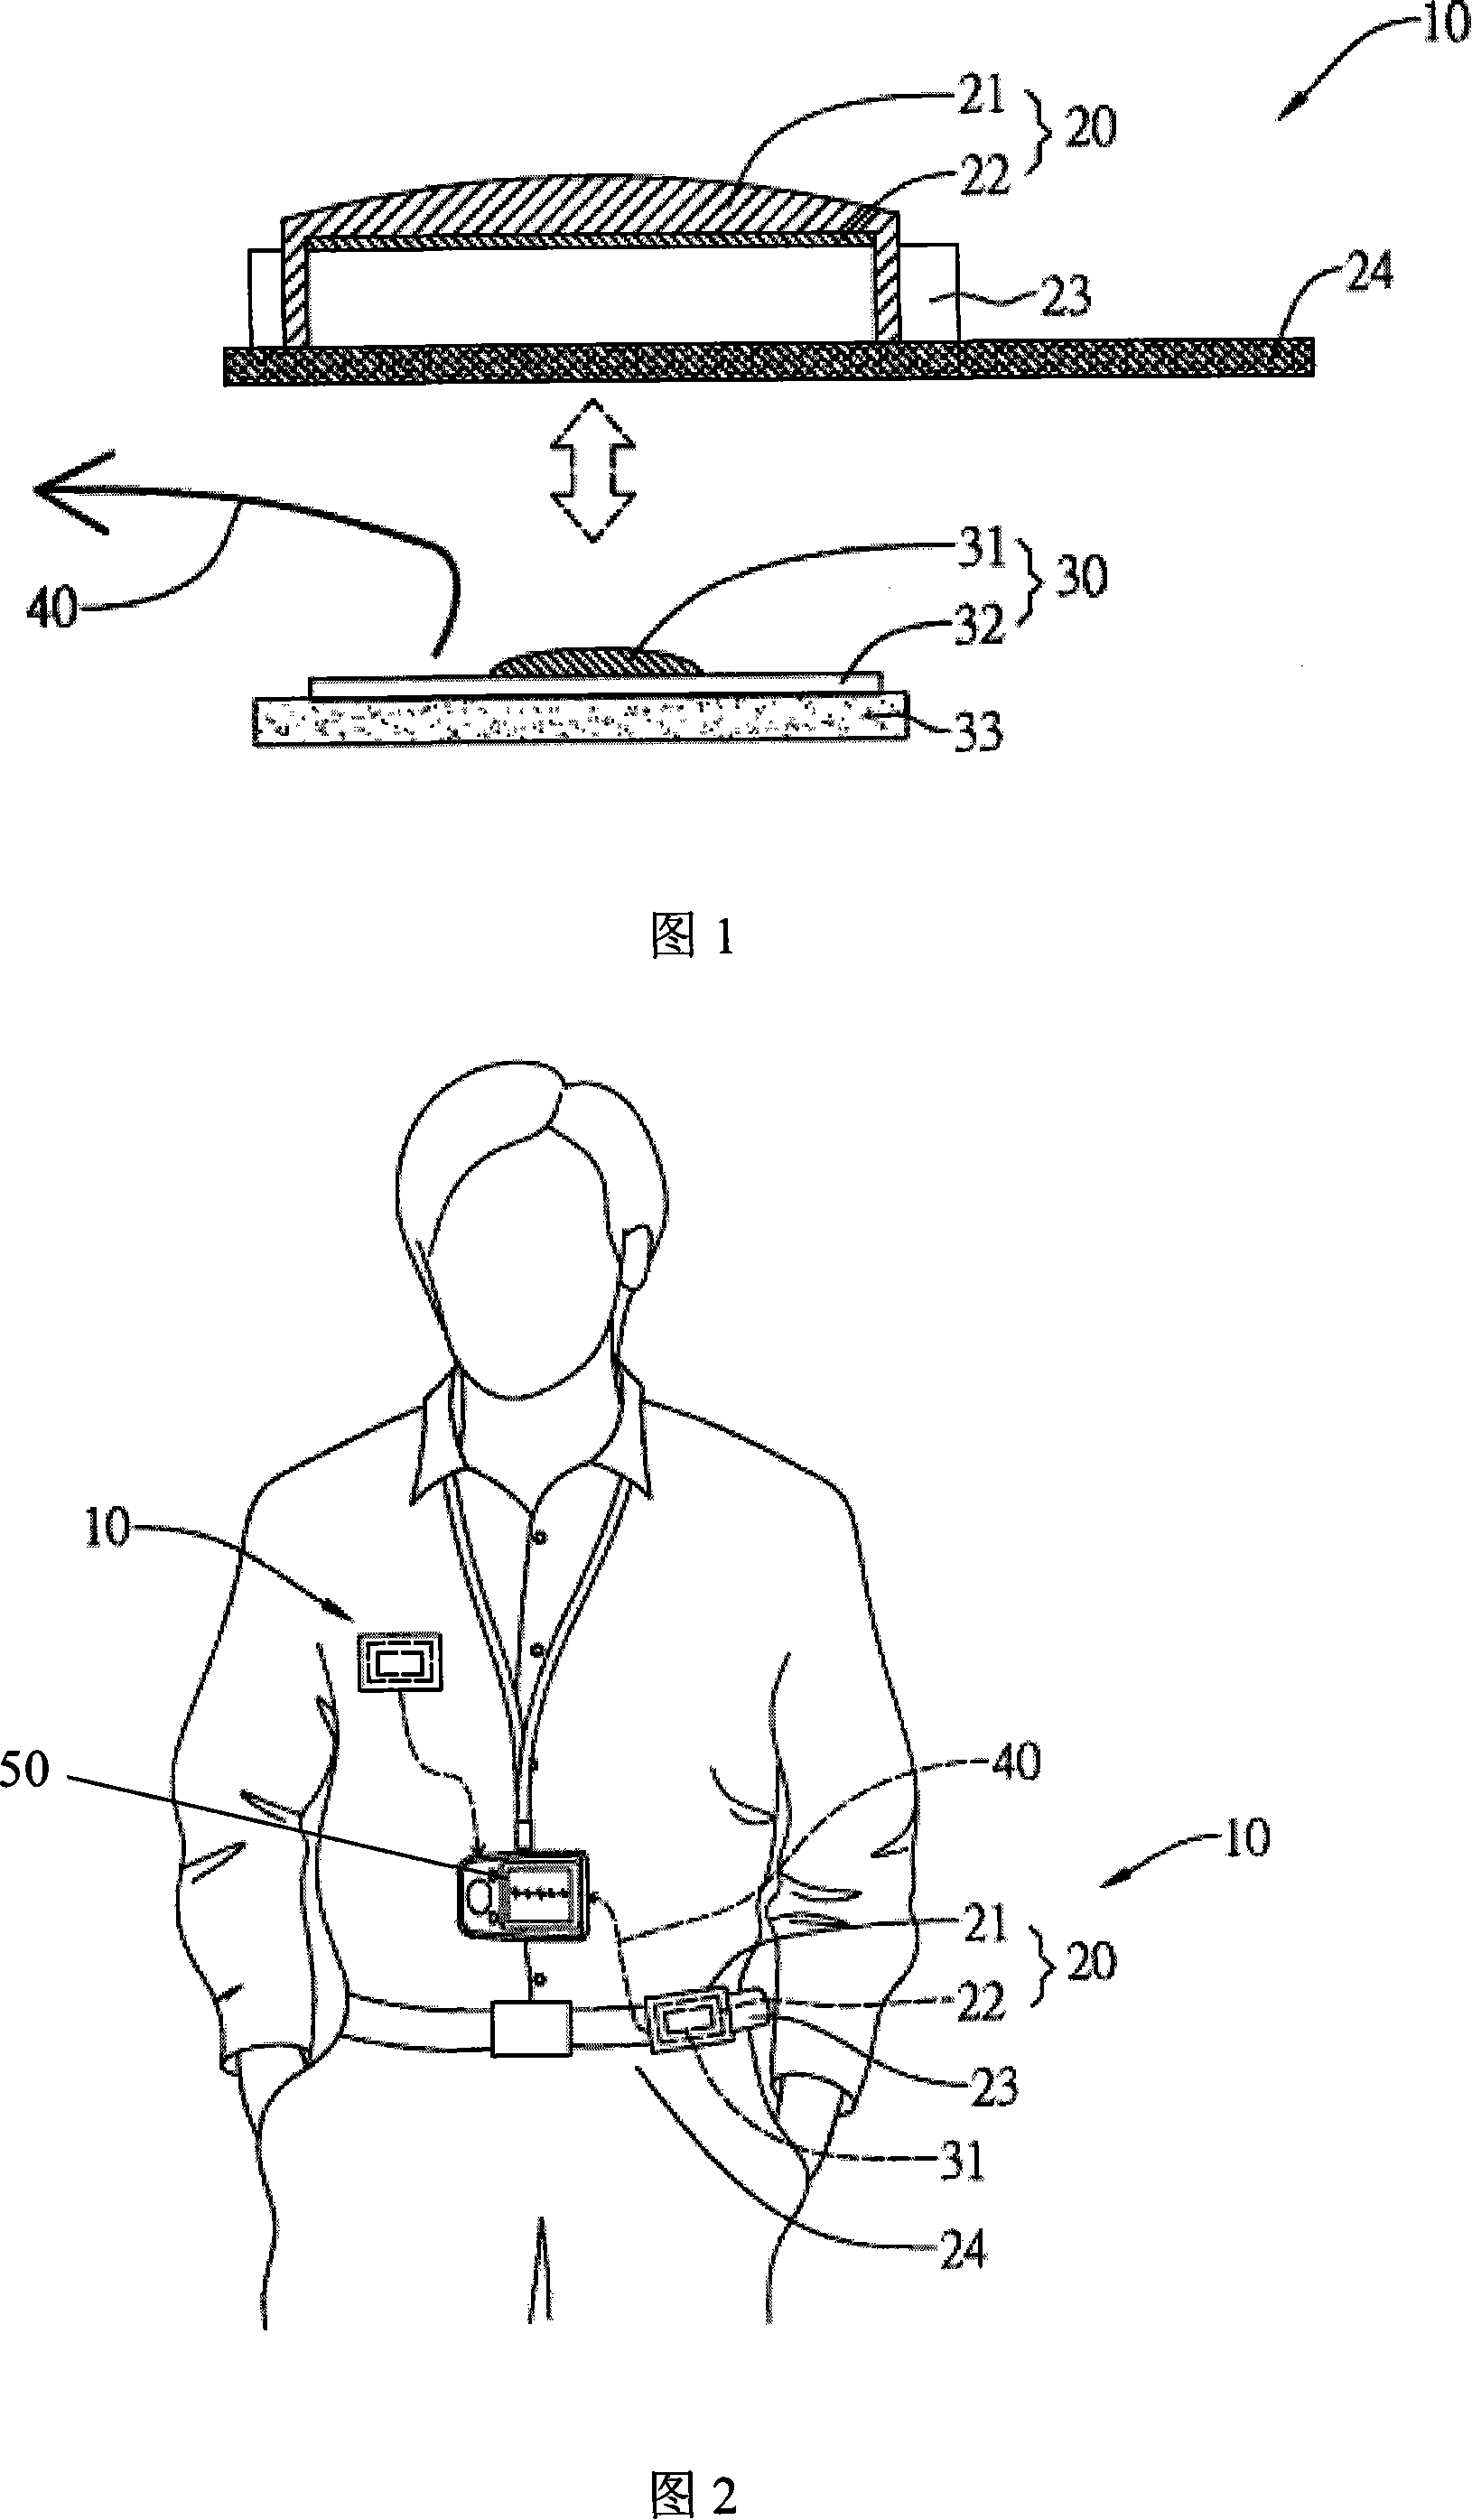 Magnetic sucking electrode assembly and portable electrocardiogram measuring system